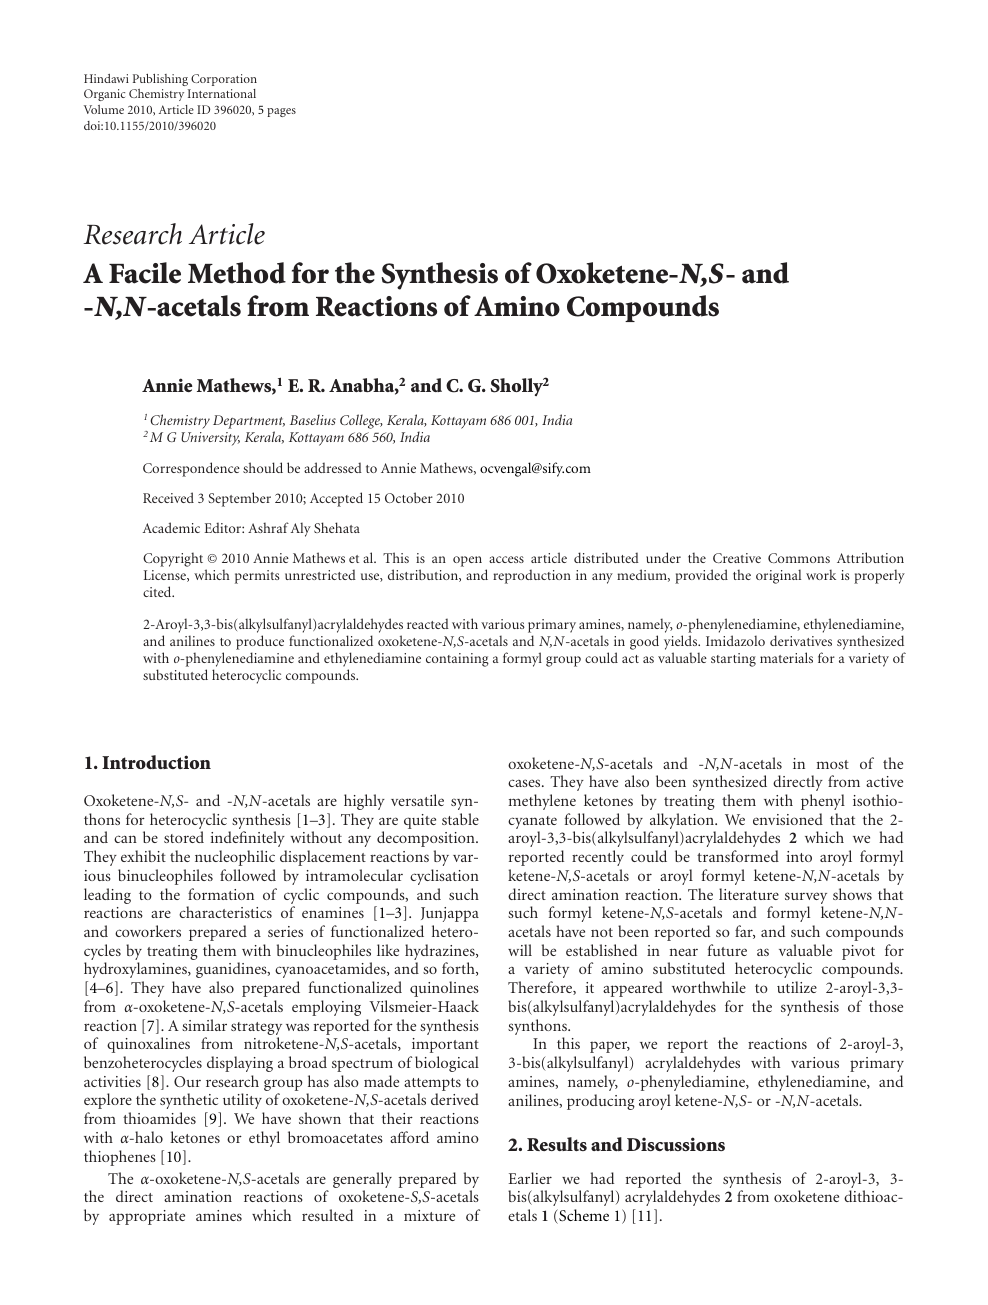 A Facile Method For The Synthesis Of Oxoketene N S And N N Acetals From Reactions Of Amino Compounds Topic Of Research Paper In Chemical Sciences Download Scholarly Article Pdf And